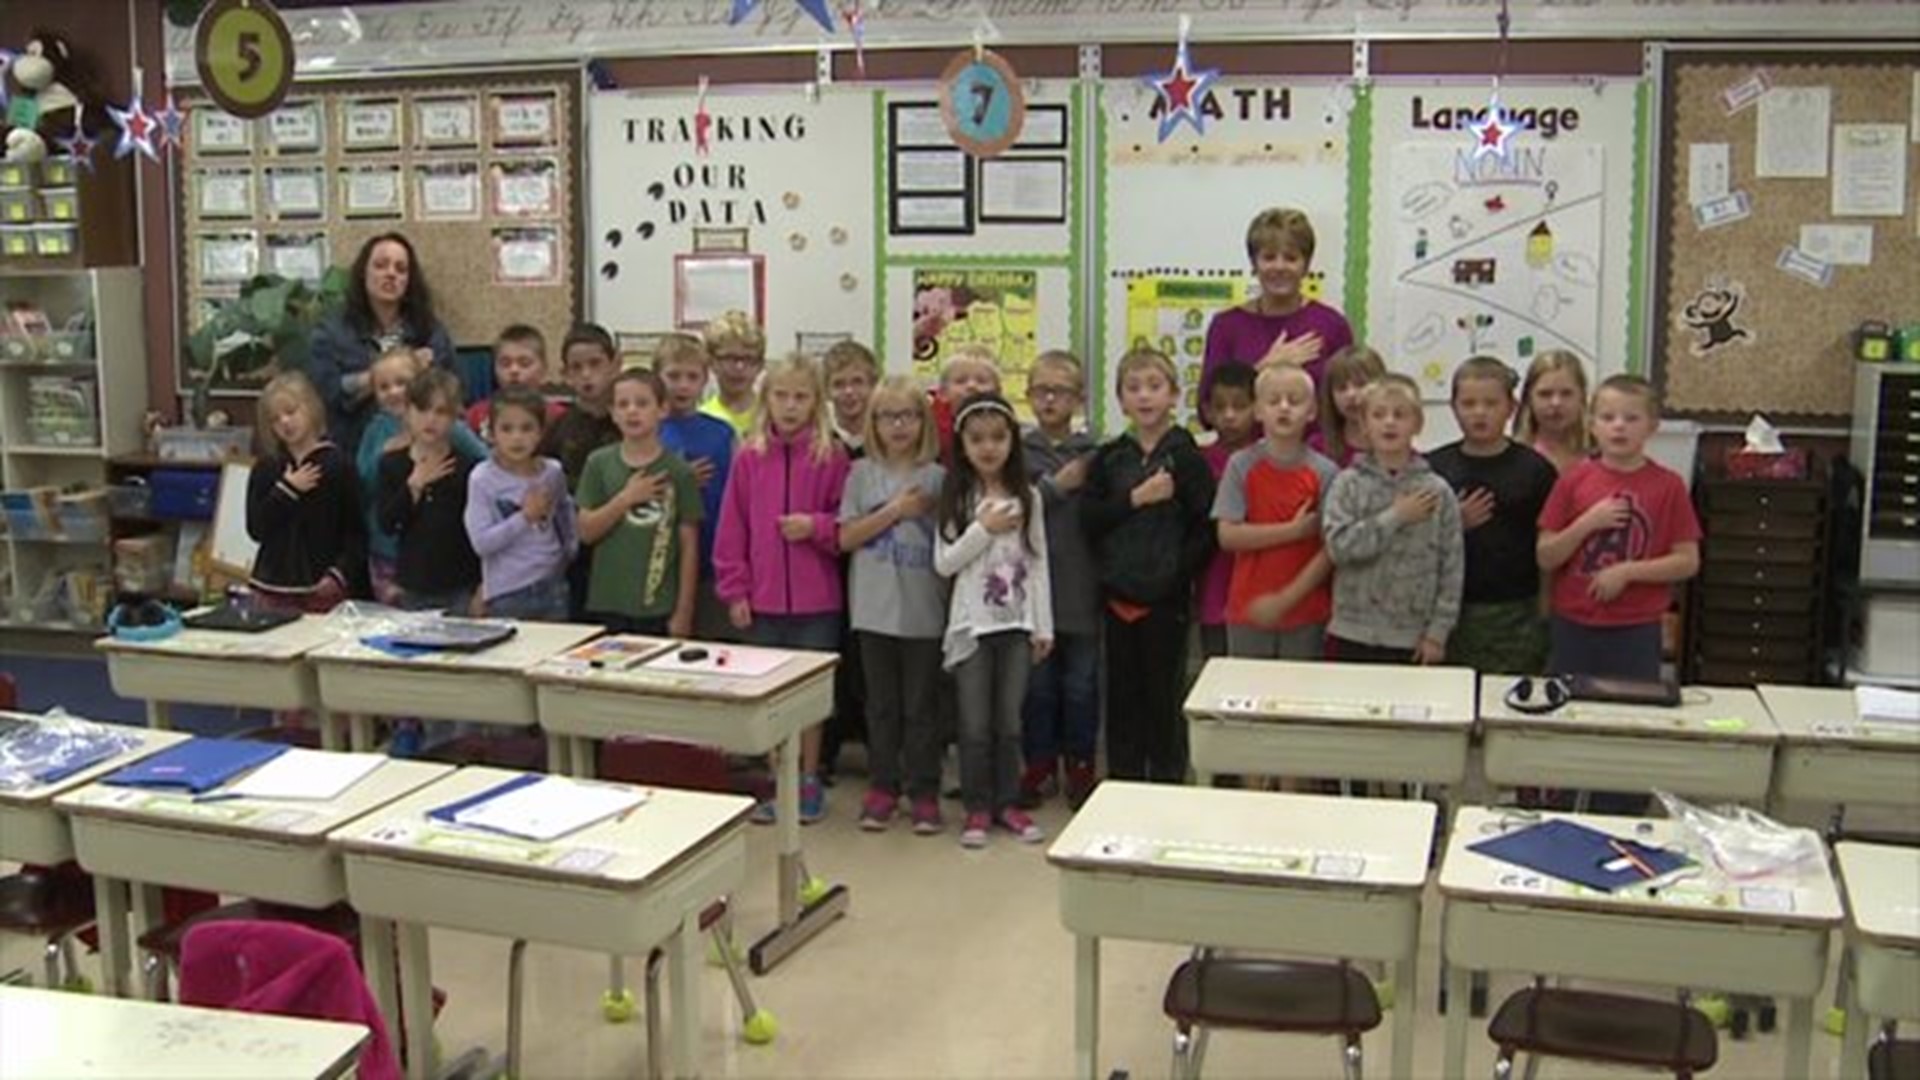 The Pledge of Allegiance from Mrs. Jacocks` class at Bicentennial Elementary